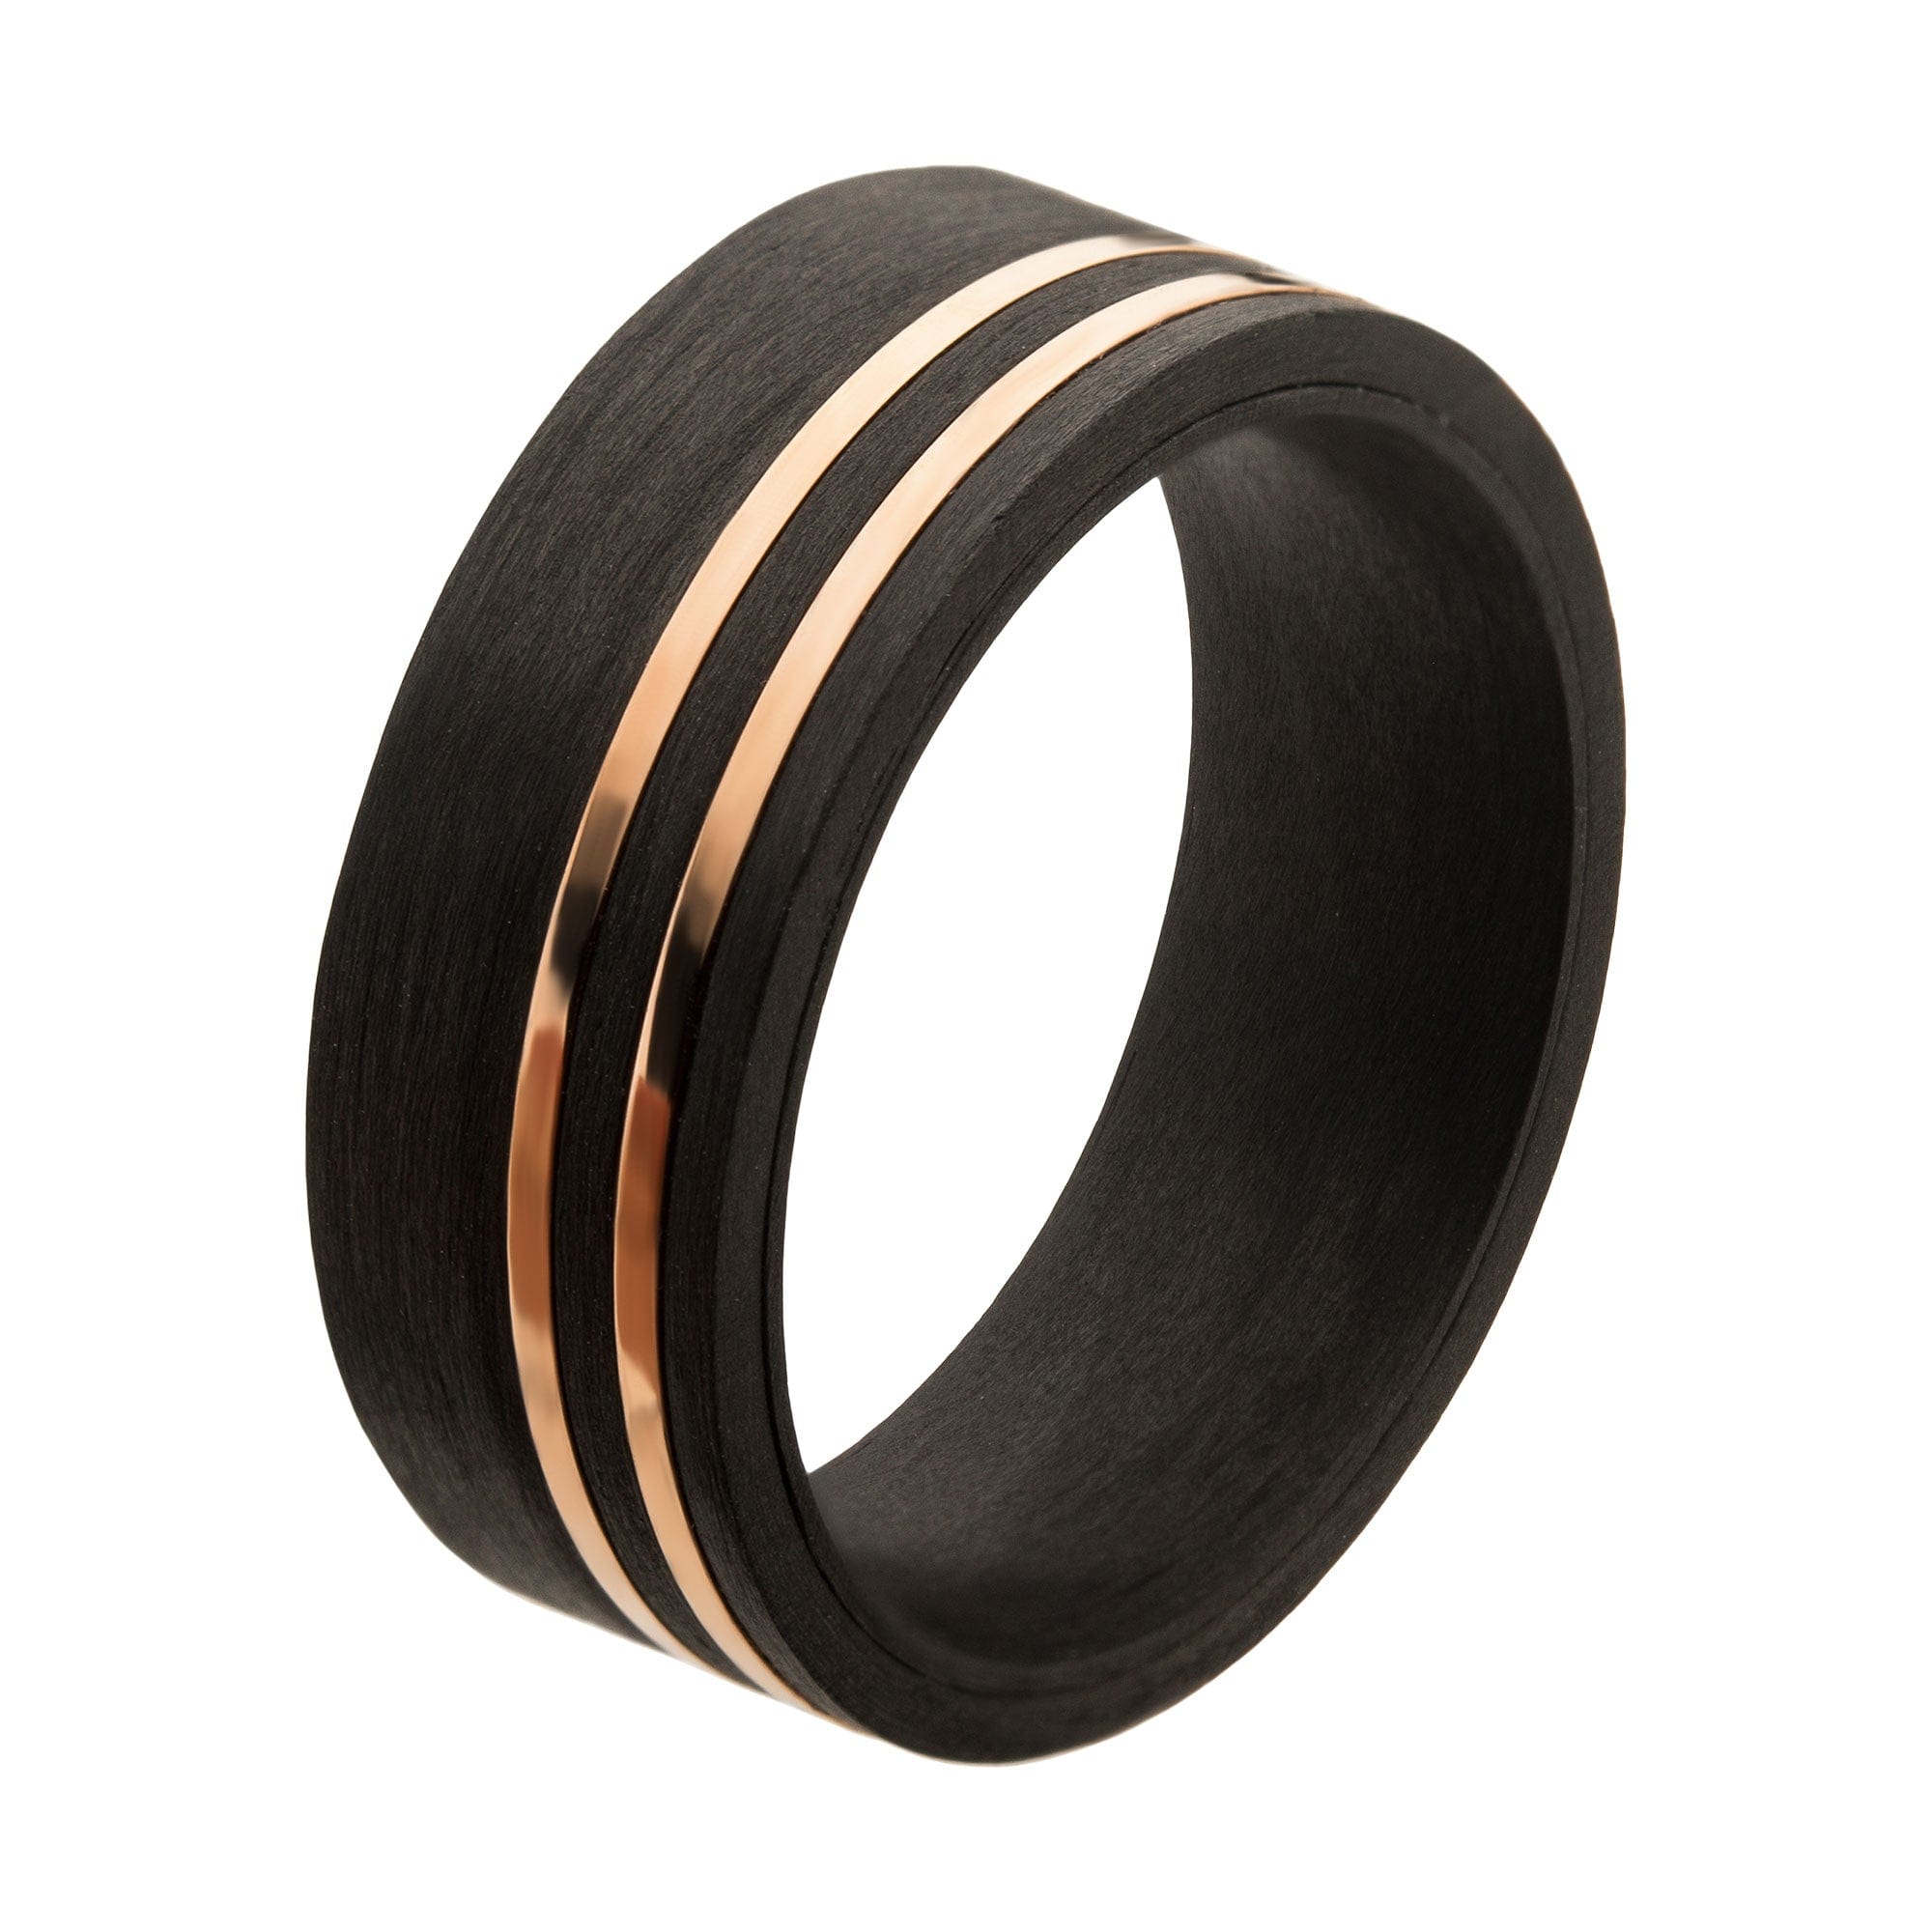 INOX JEWELRY Rings Black and Rose Tone Stainless Steel Solid Carbon Fiber Inlaid Thin Lines Band Ring